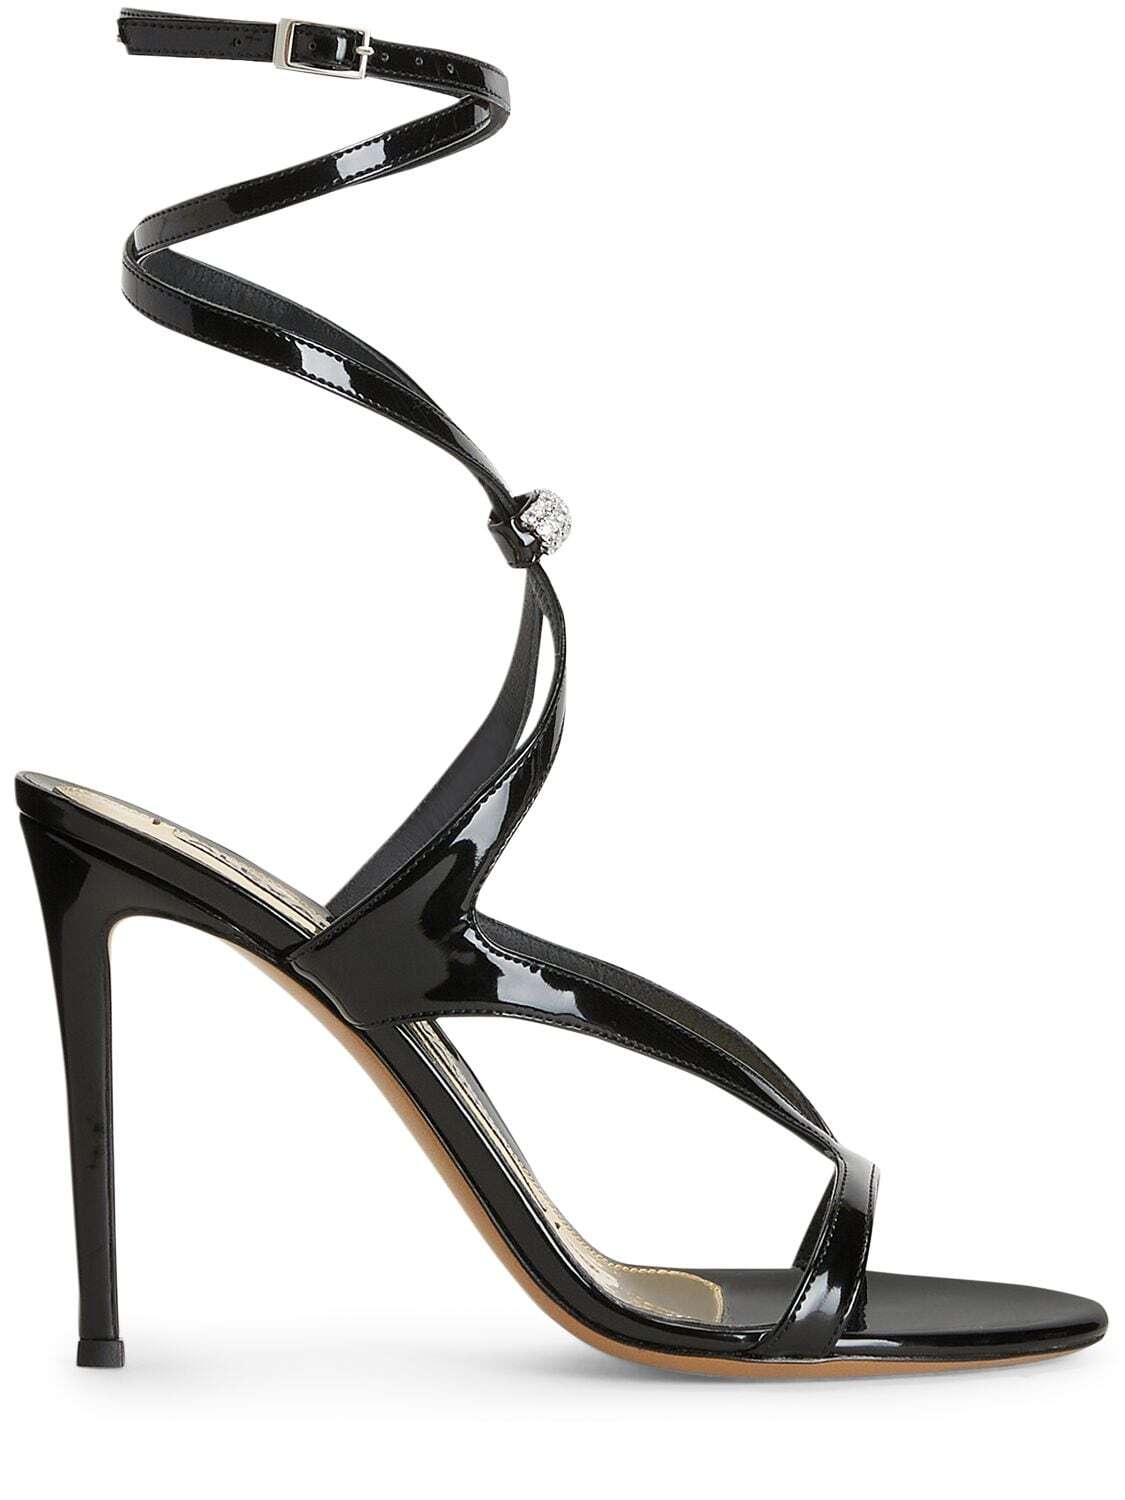 ALEXANDRE VAUTHIER 105mm Faux Leather Wraparound Sandals in black